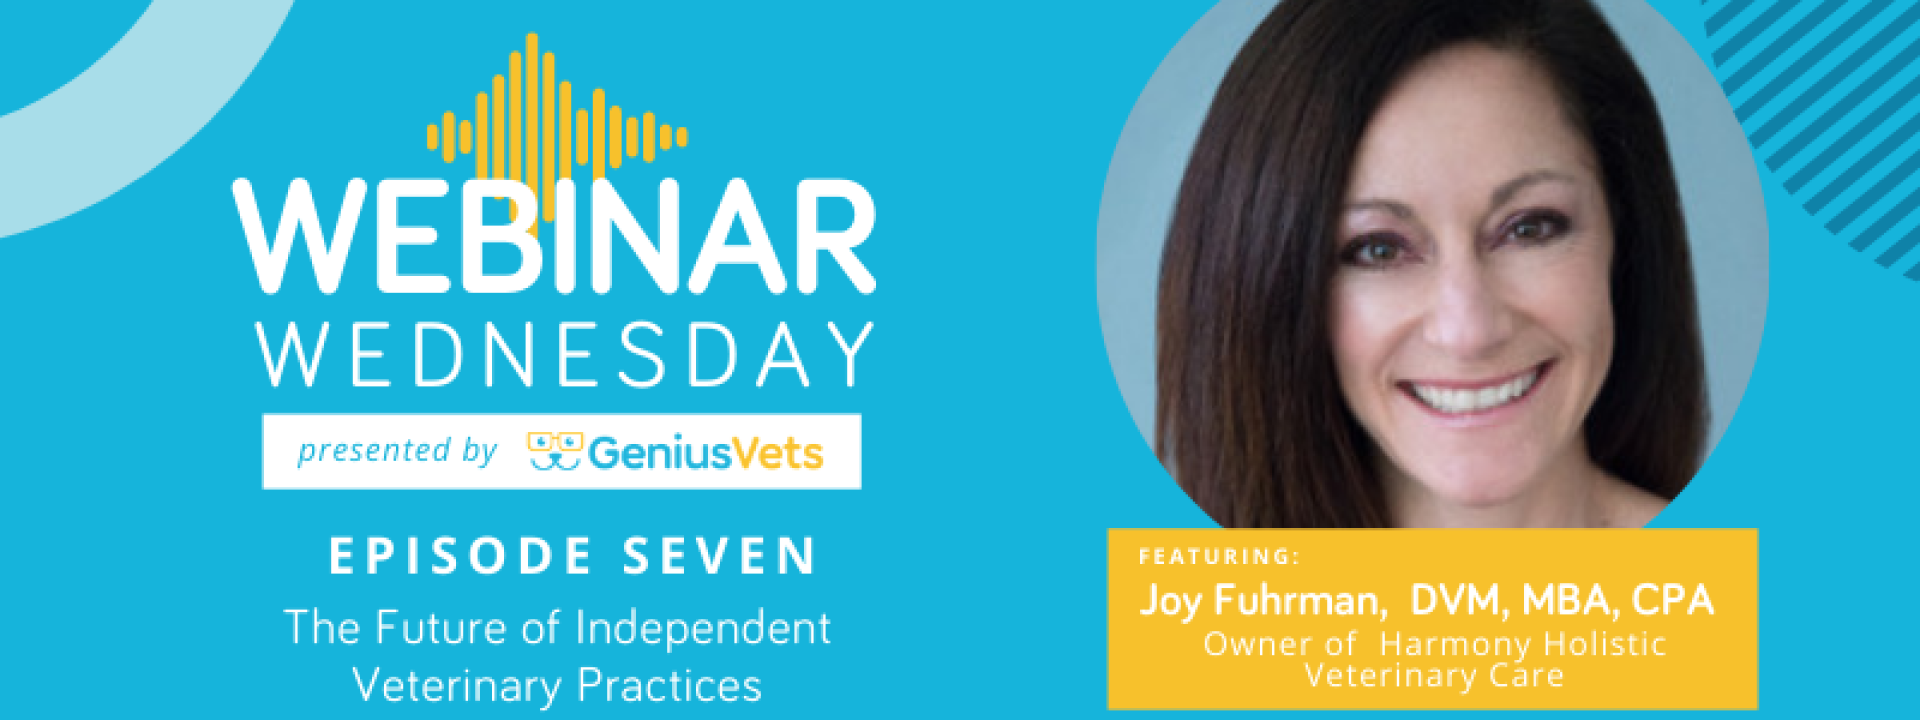 The Future of Independent Veterinary Practices With Dr. Joy Fuhrman